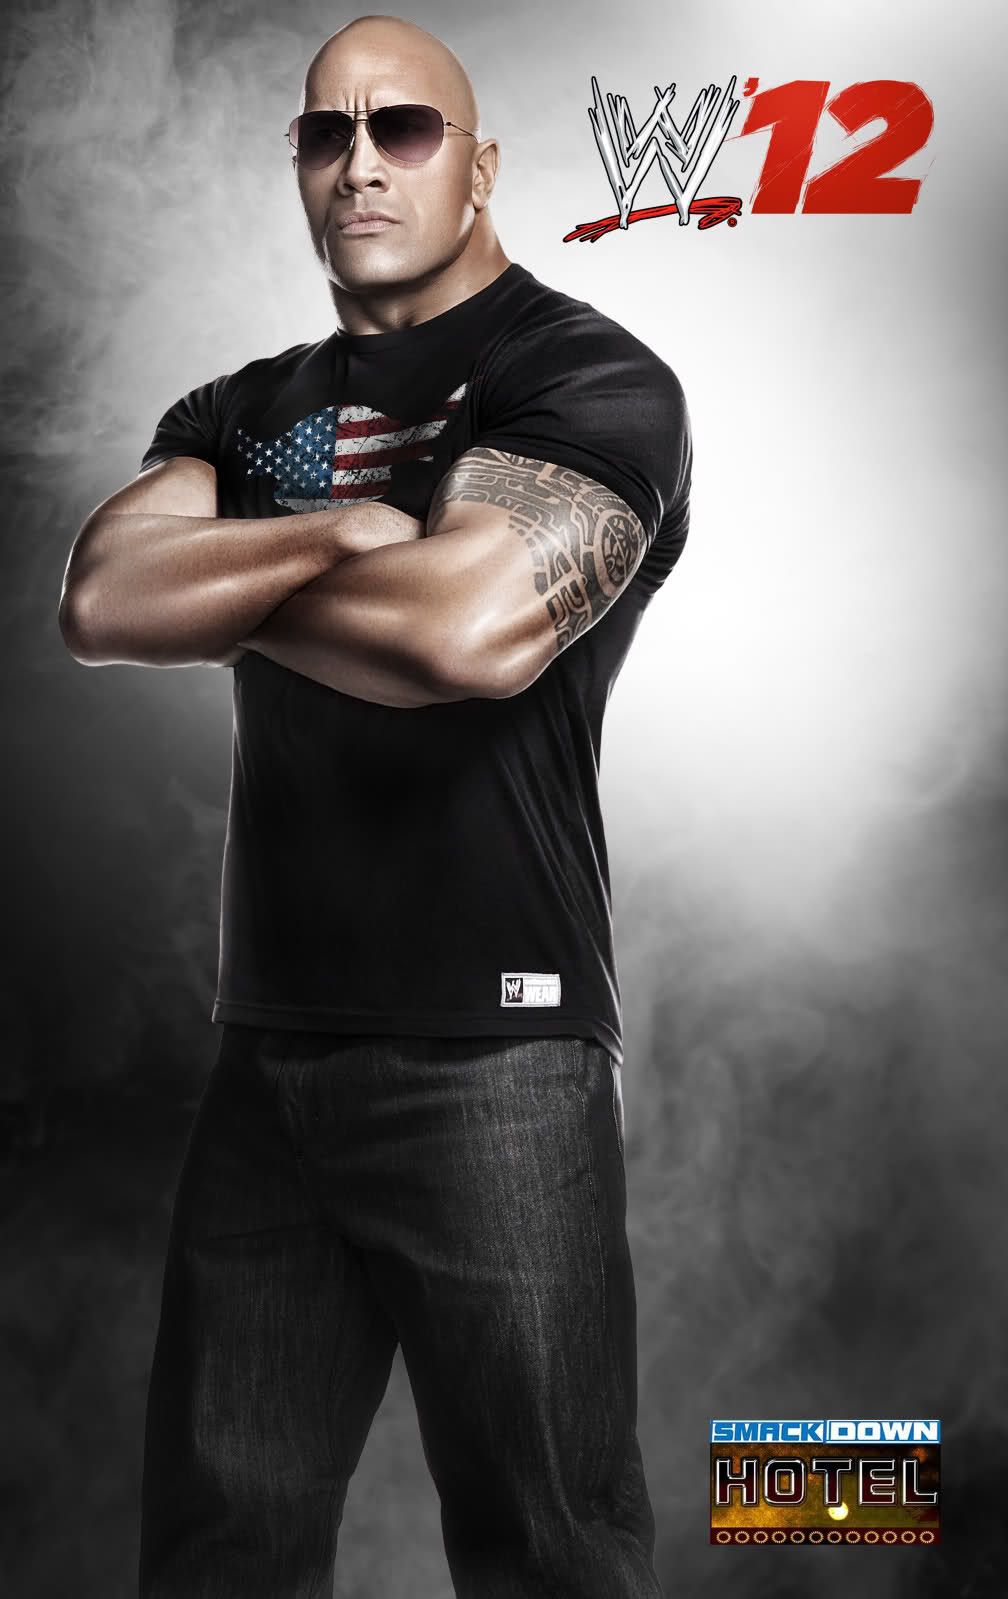 New WWE '12 The Rock Wallpaper - WWE '12 General Discussion ...